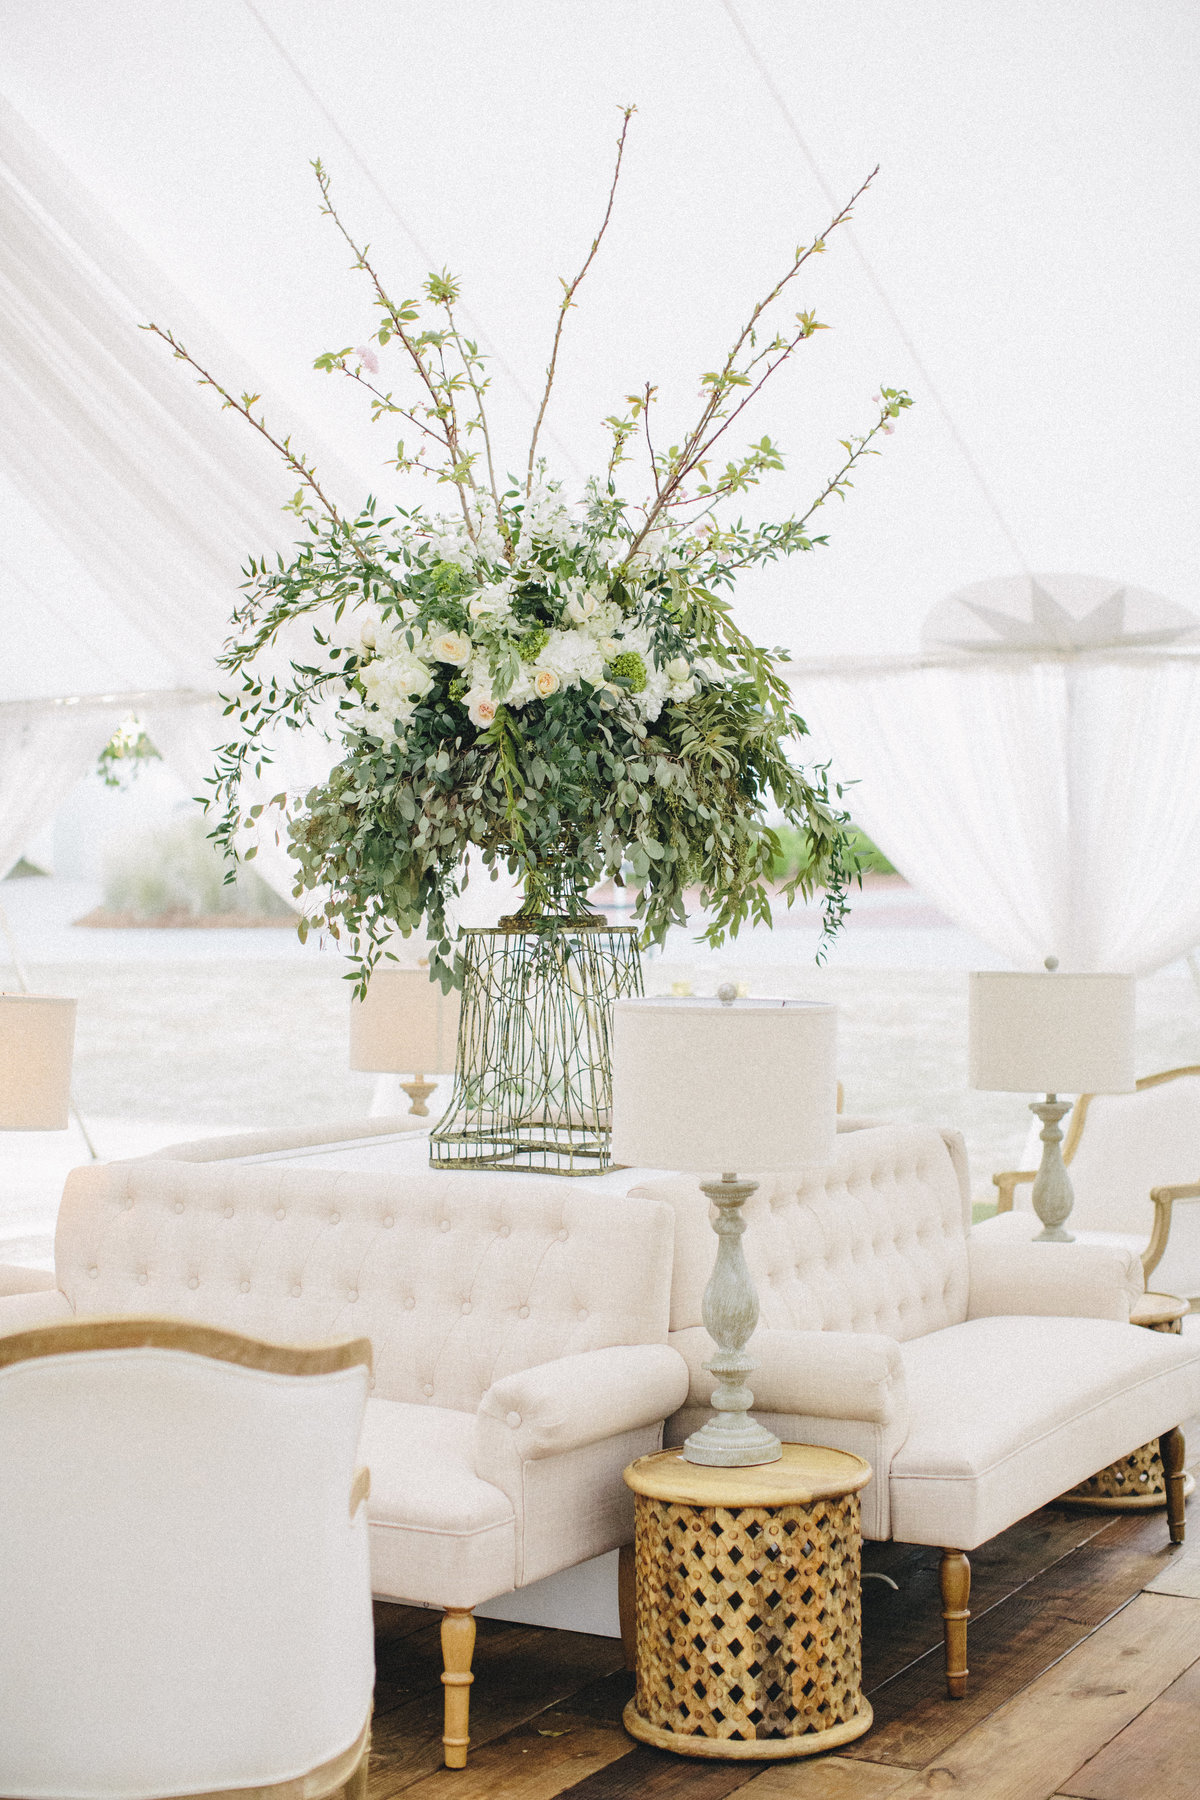 clink-events-greenville-wedding-planner-outdoor-tent-reception-4